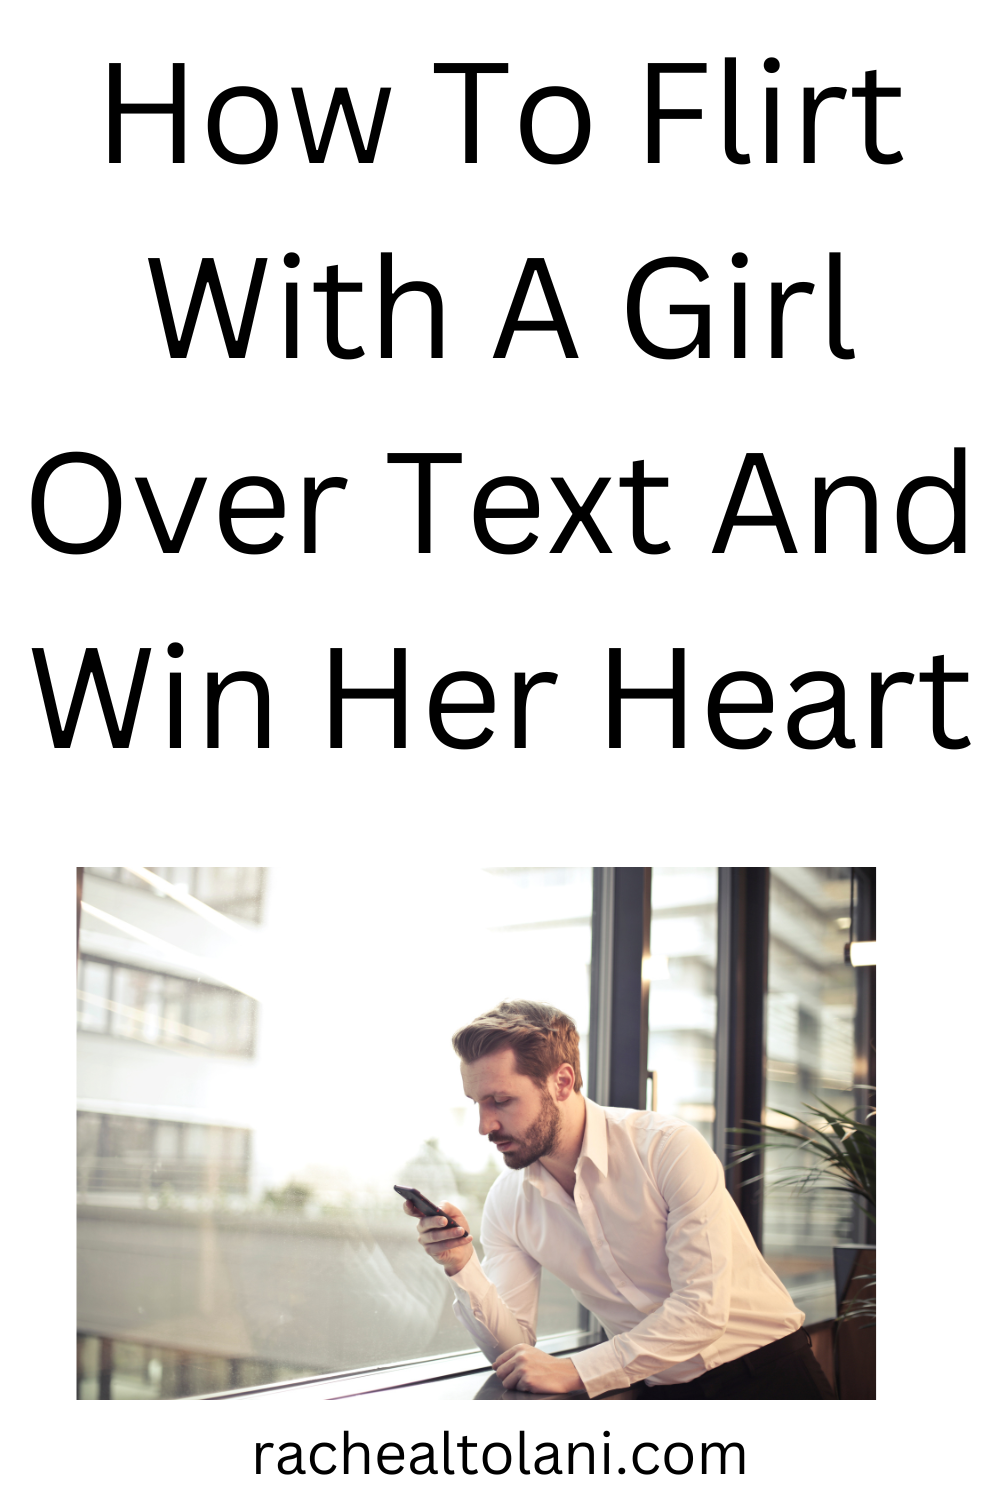 How To Flirt With A Girl Over Text And Win Her Heart 9066